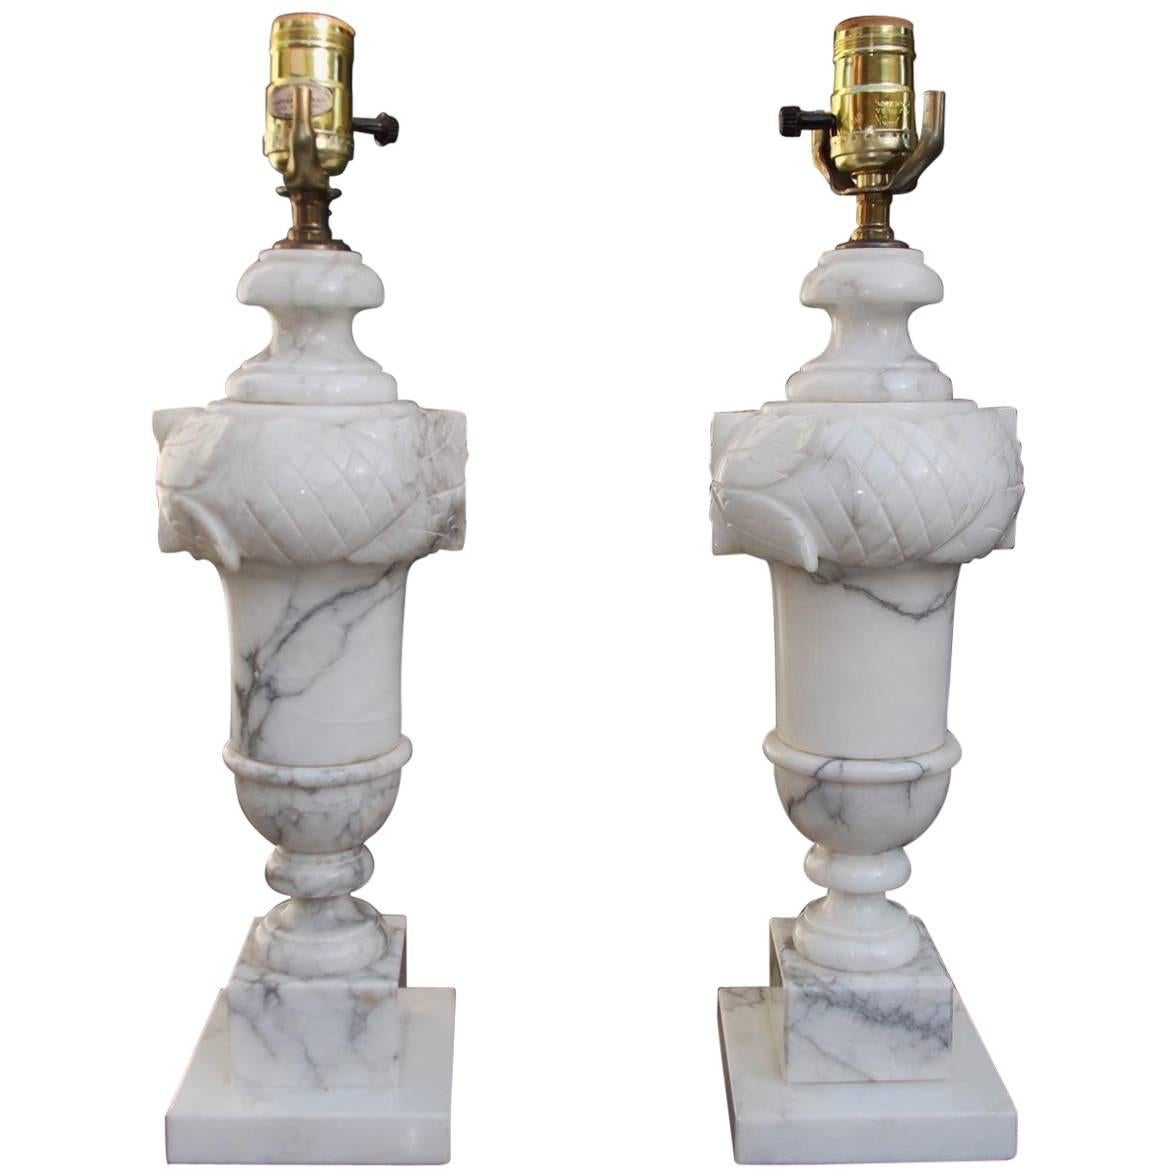 Pair of Italian Hand-Carved Prussion Marble Floral Lamps, Circa 1880